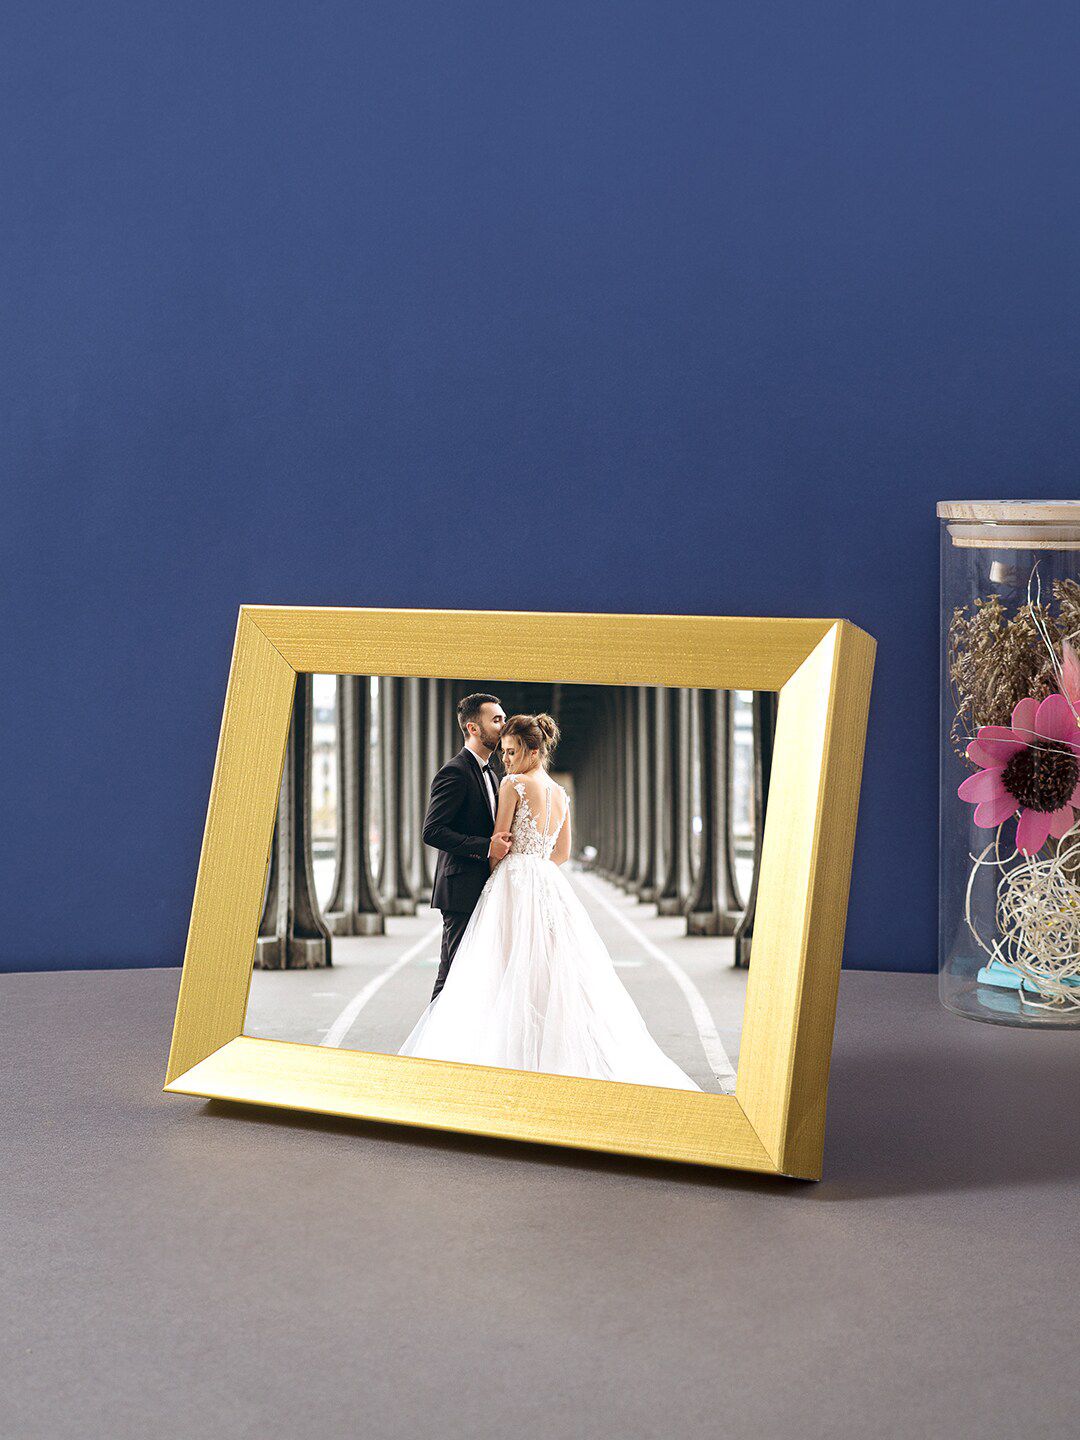 Golden Peacock Unisex Gold-Coloured Table-Top Photo Frames Price in India